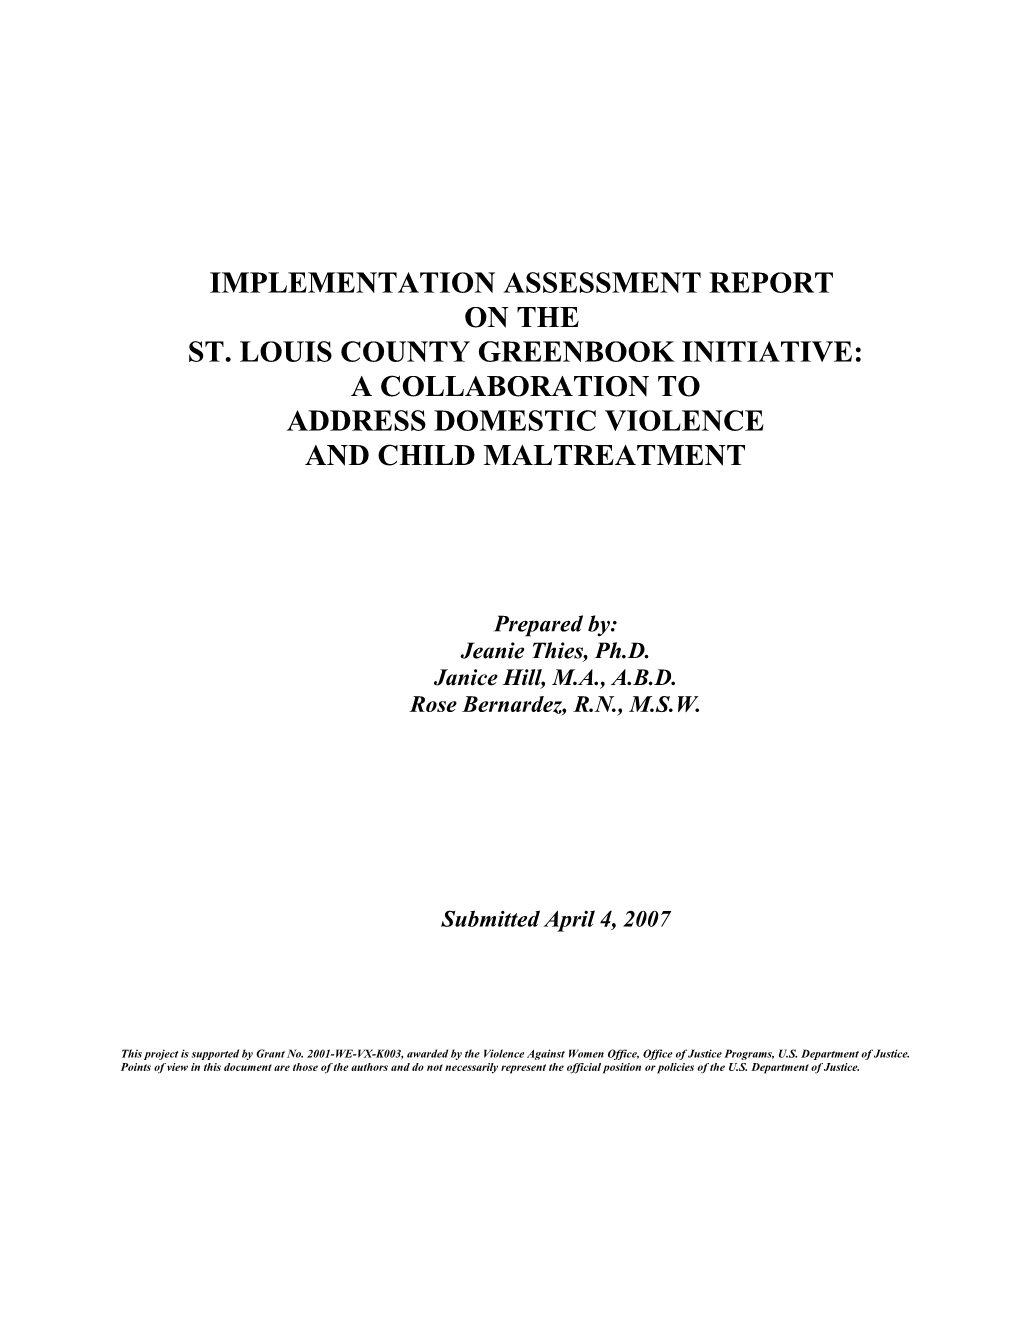 St. Louis County Greenbook Initiative